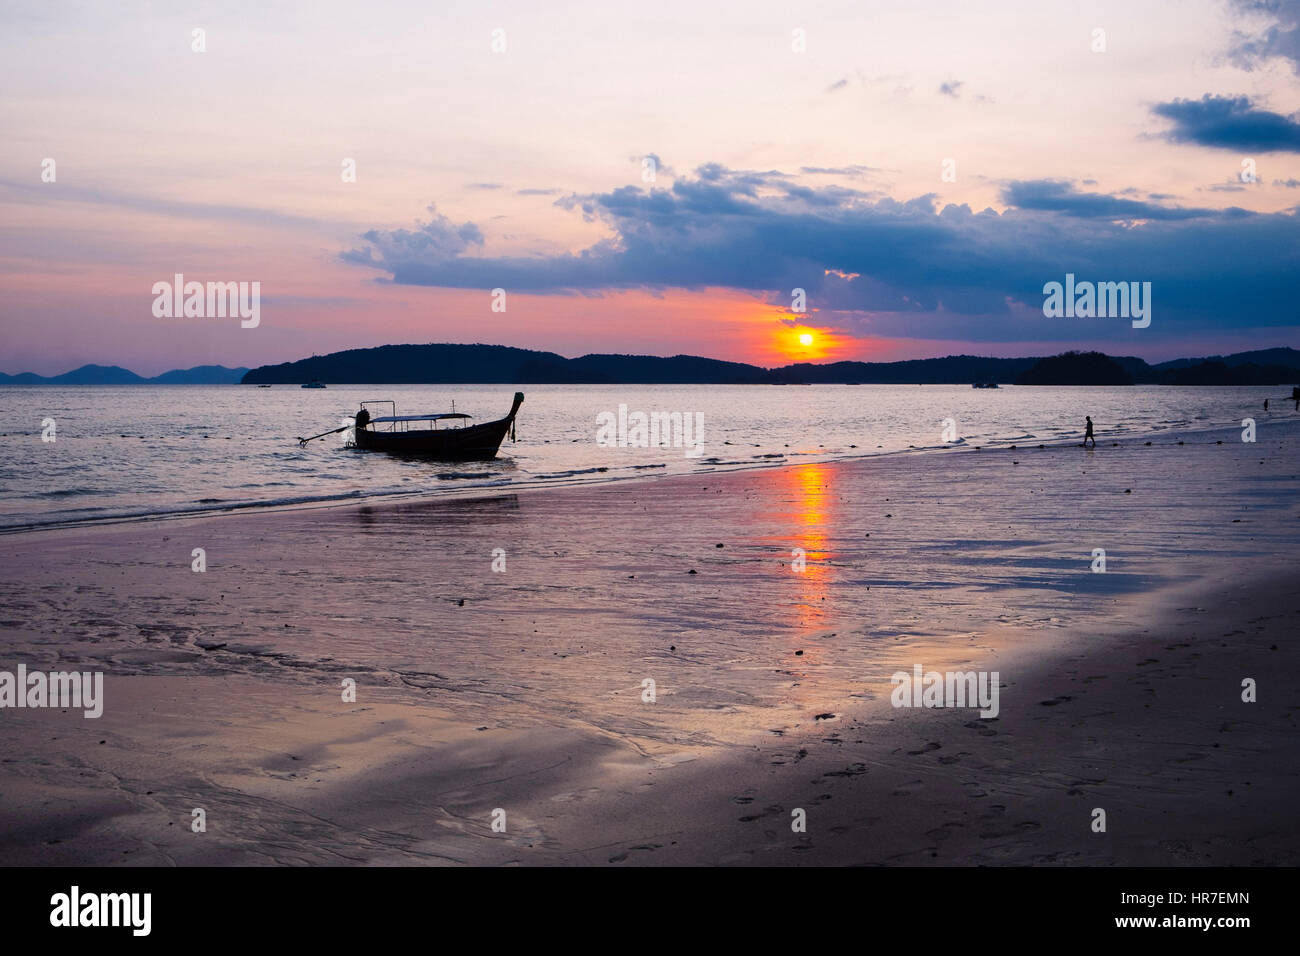 Two  distant human figures and a Thai long-tail boat at sunset, Ao Nang Beach, Krabi Province, Thailand Stock Photo